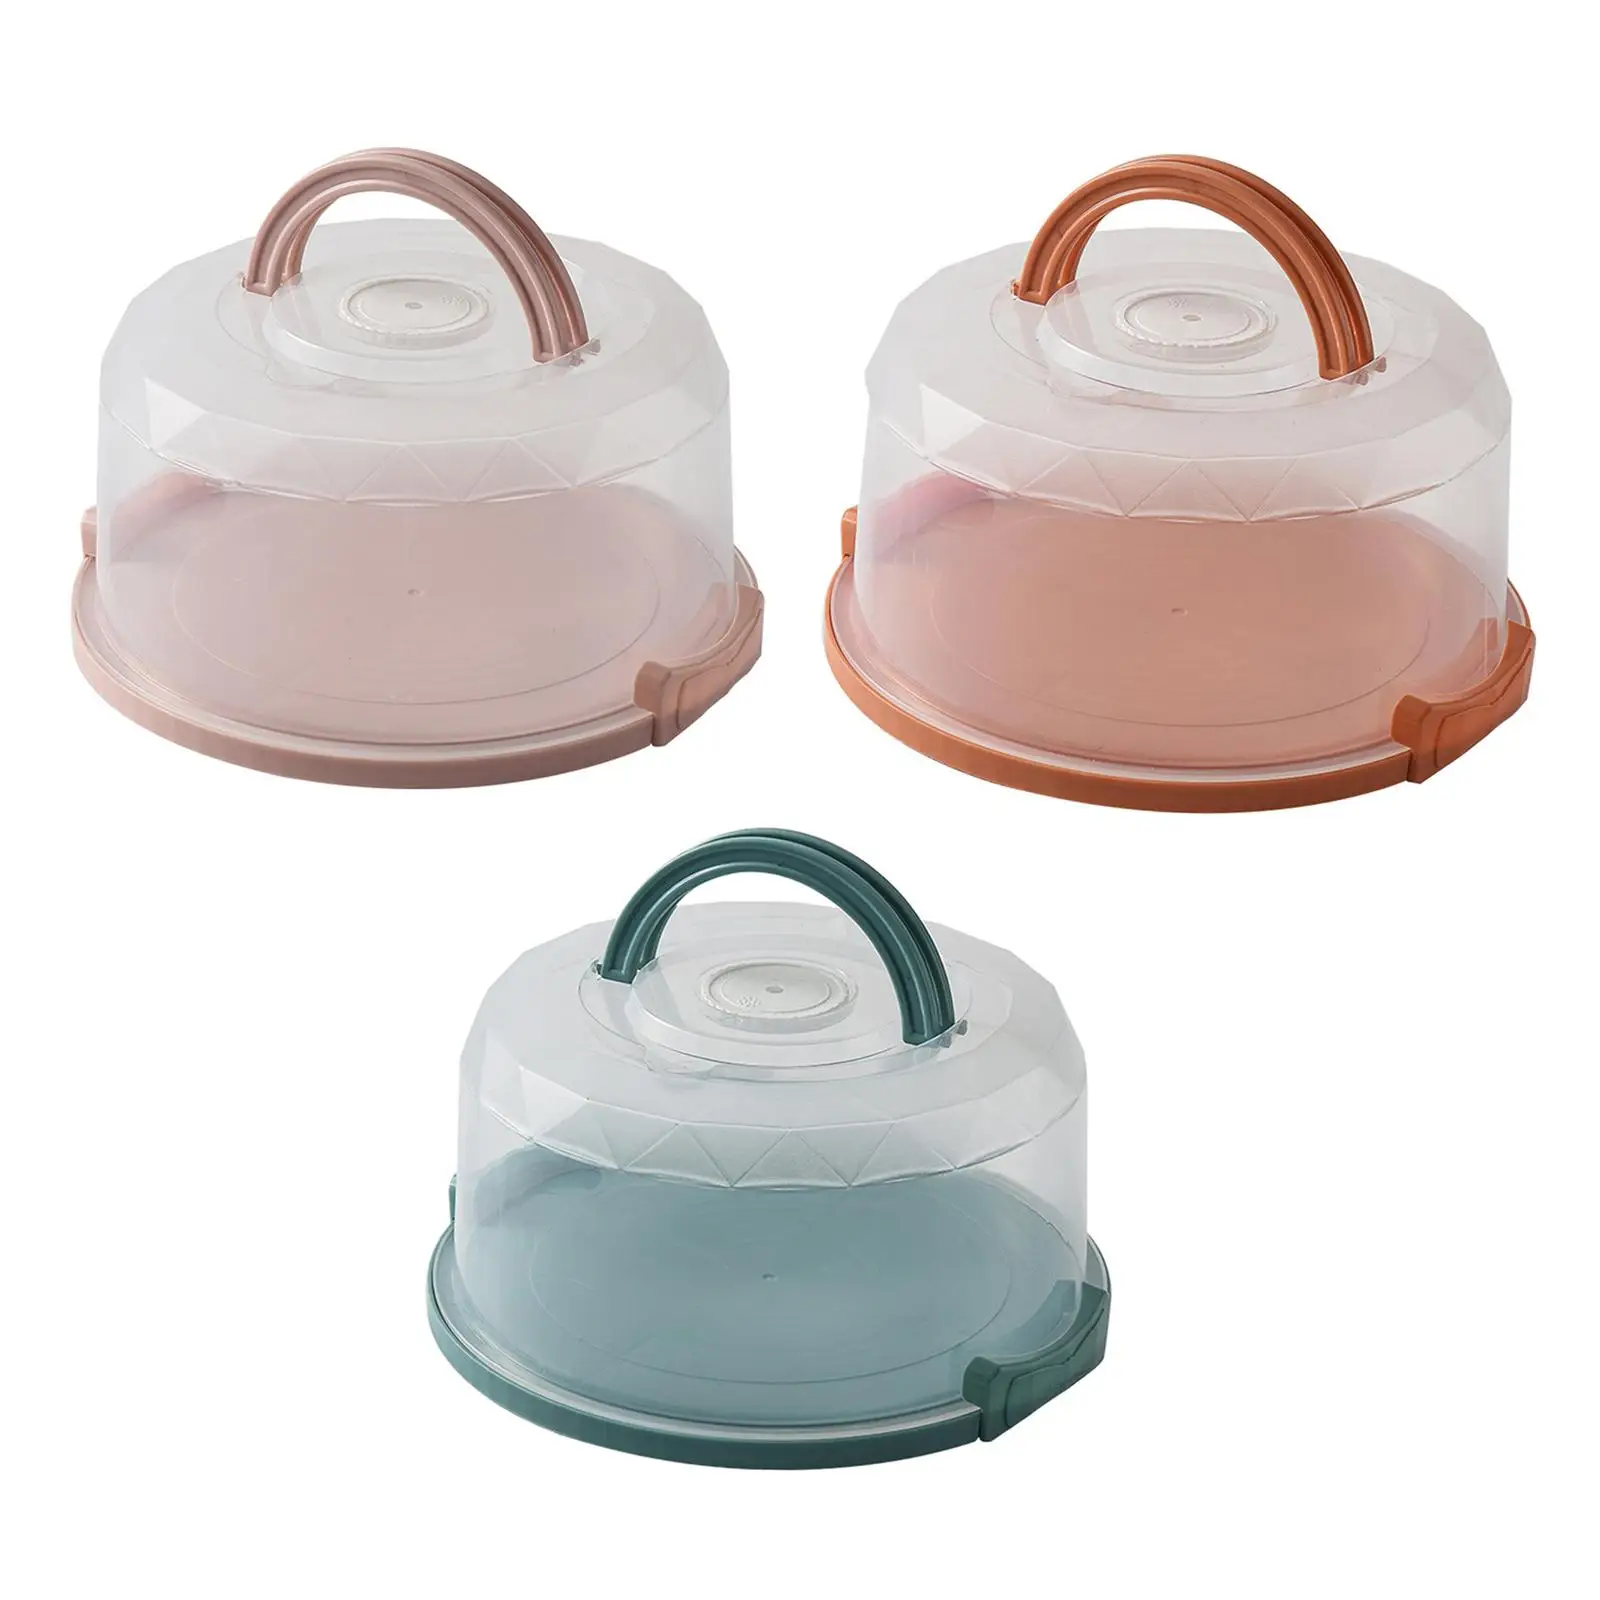 8inch Cupcake Carrier Container, Cake Stand, Desserts Doughnuts Cake Carrier